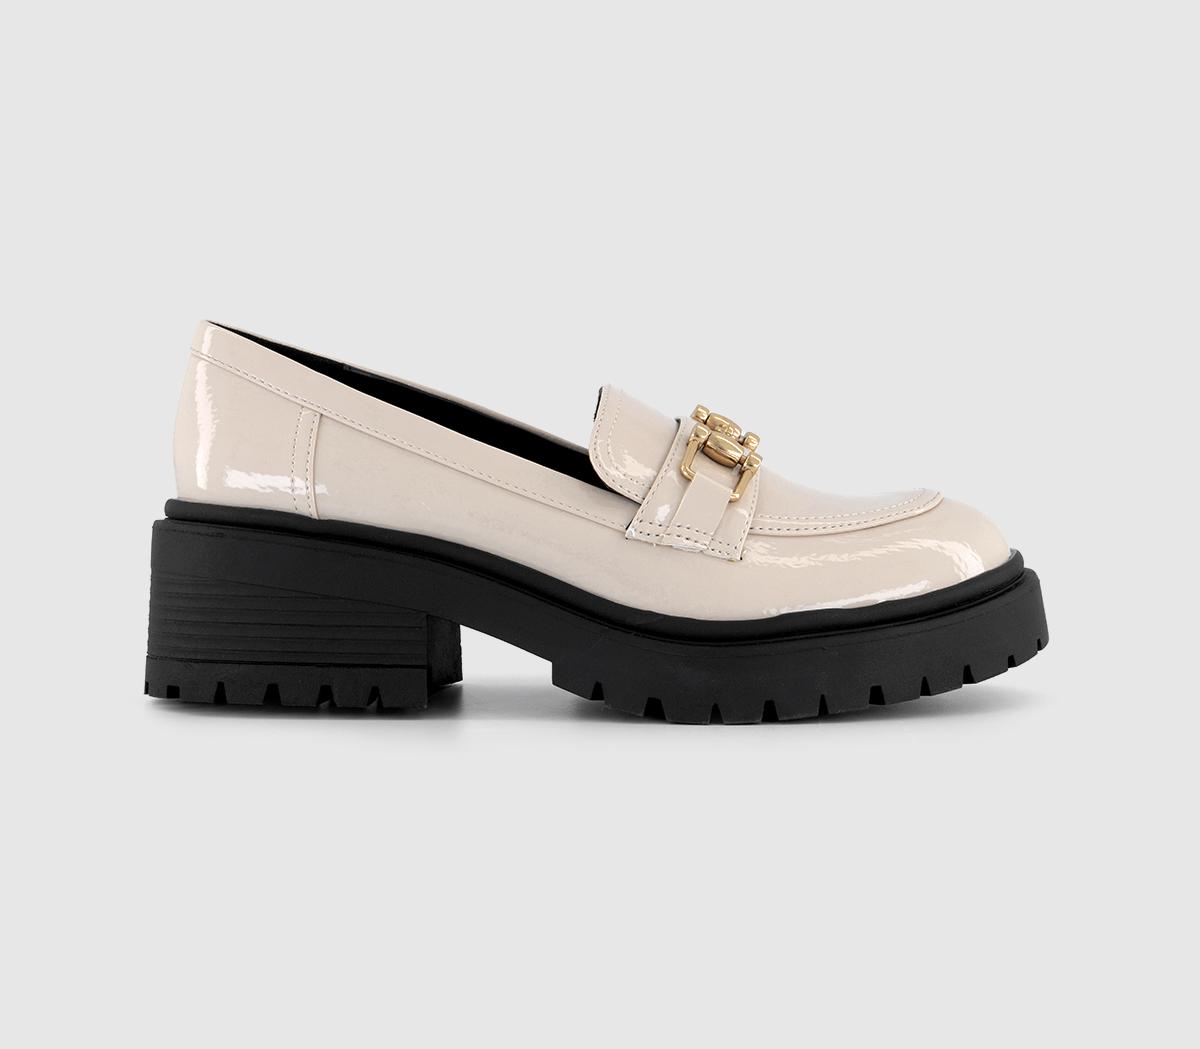 OFFICEFontana Buckle Chunky LoafersOff White Patent